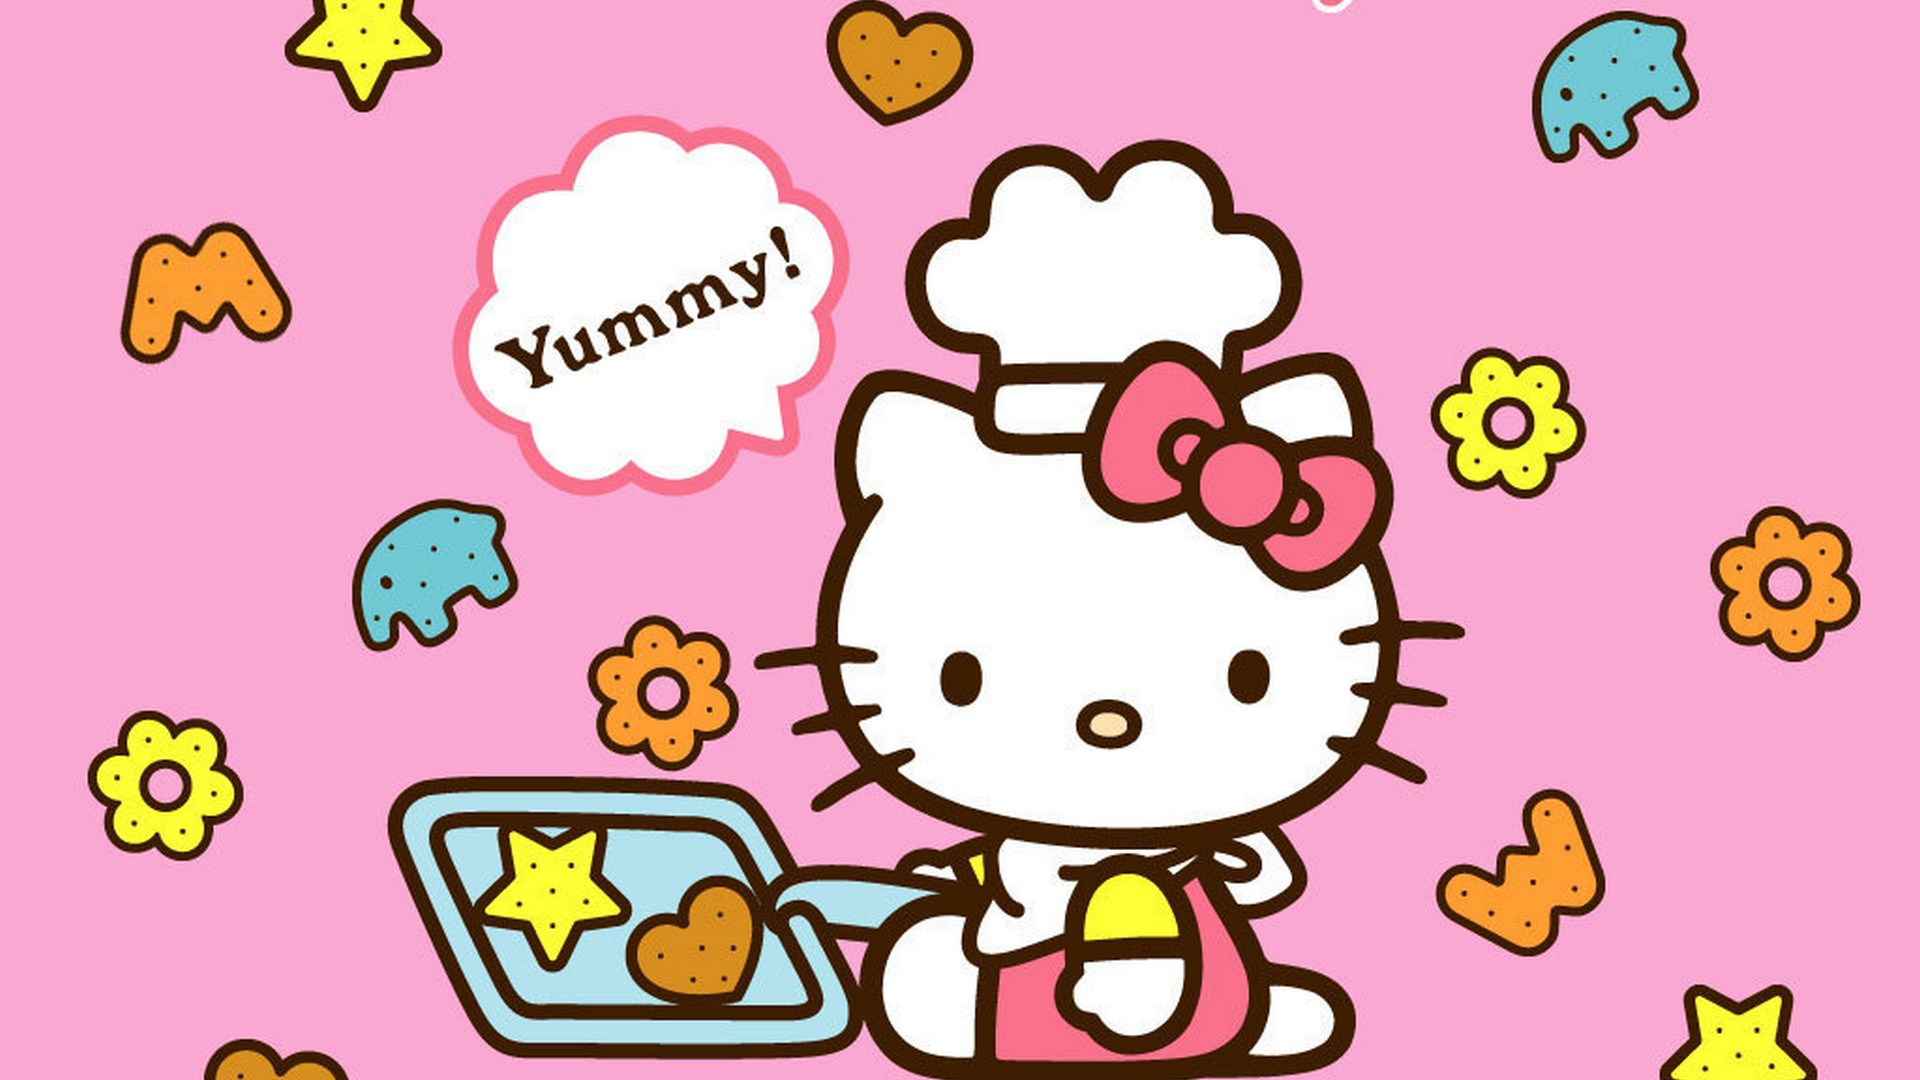 Hello Kitty Pictures Wallpaper with image resolution 1920x1080 pixel. You can use this wallpaper as background for your desktop Computer Screensavers, Android or iPhone smartphones